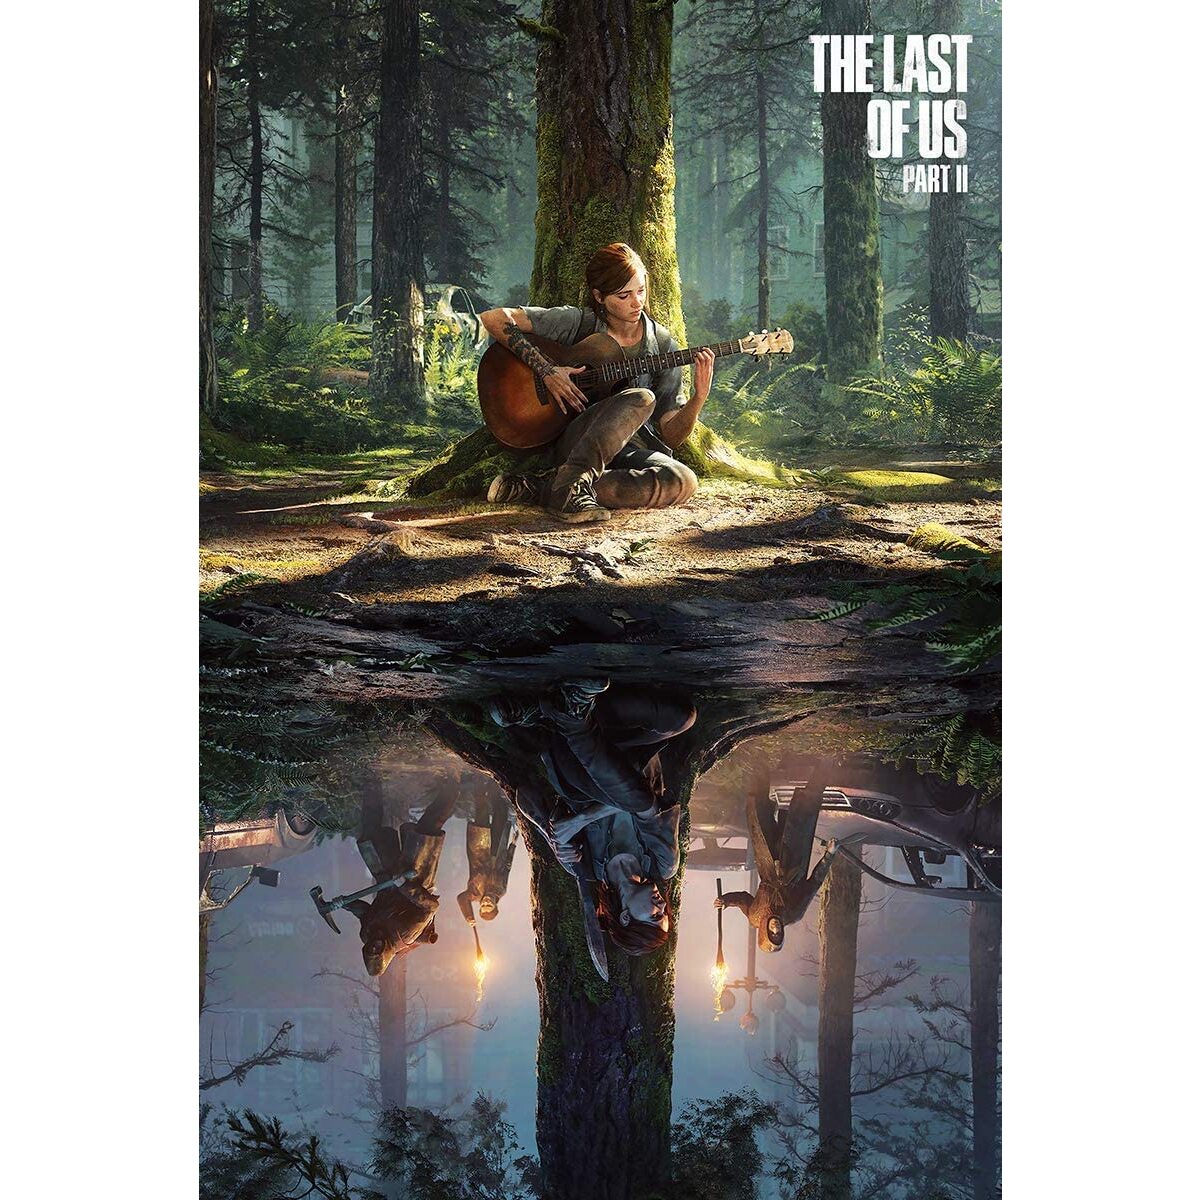 https://videogameheaven.com/wp-content/uploads/2020/09/The-Last-of-Us-Part-II-Reflection-Poster.jpg